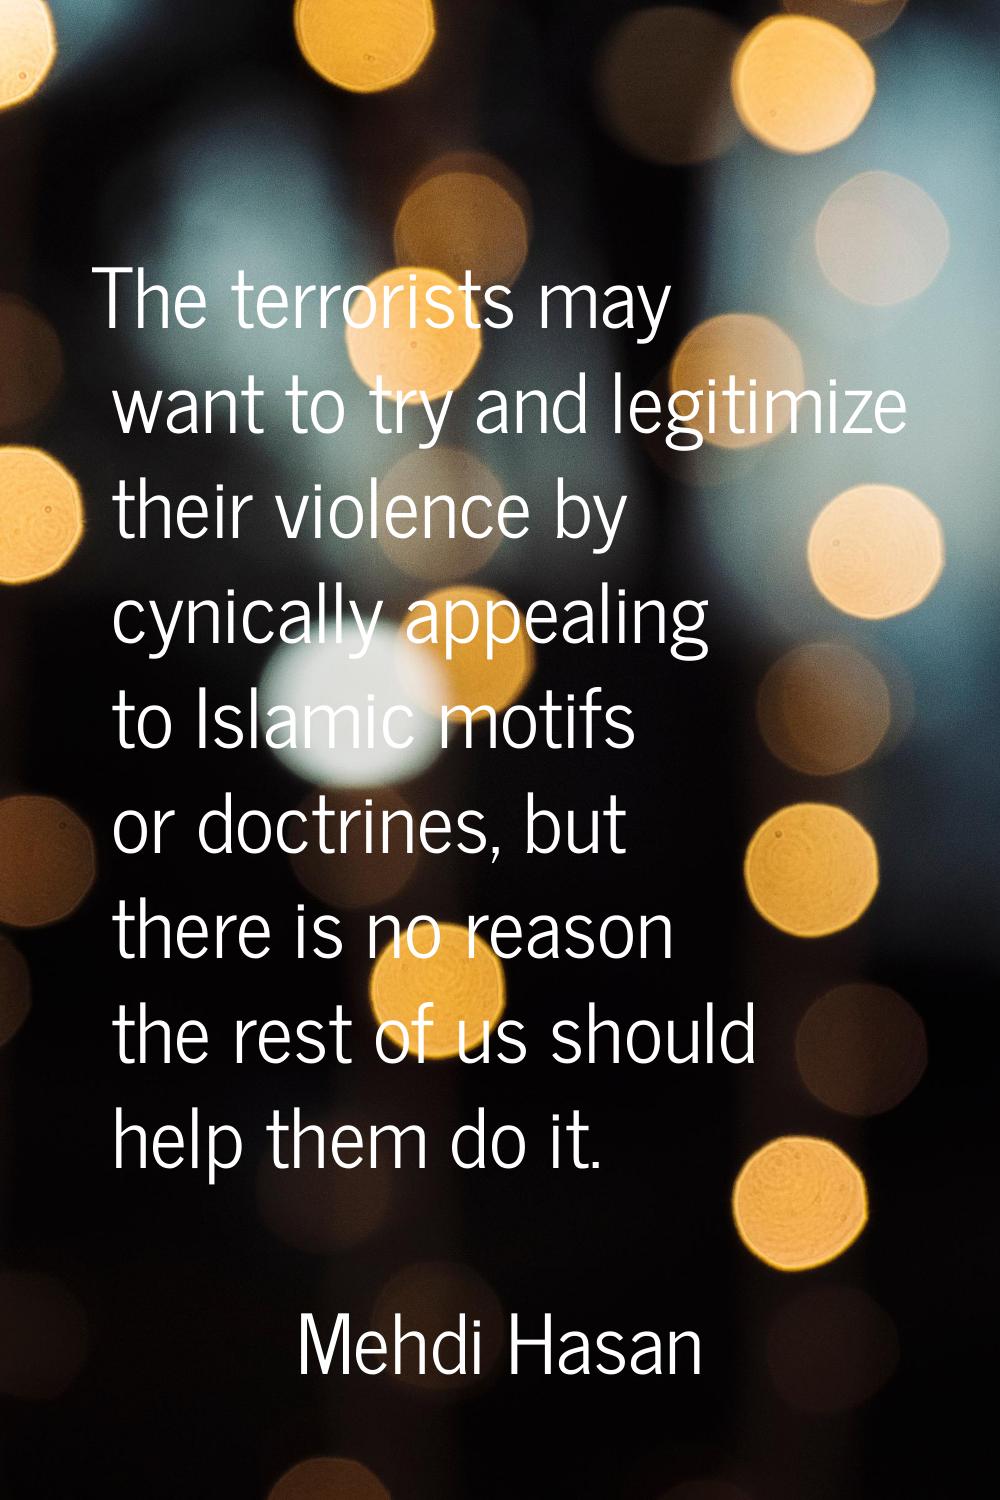 The terrorists may want to try and legitimize their violence by cynically appealing to Islamic moti